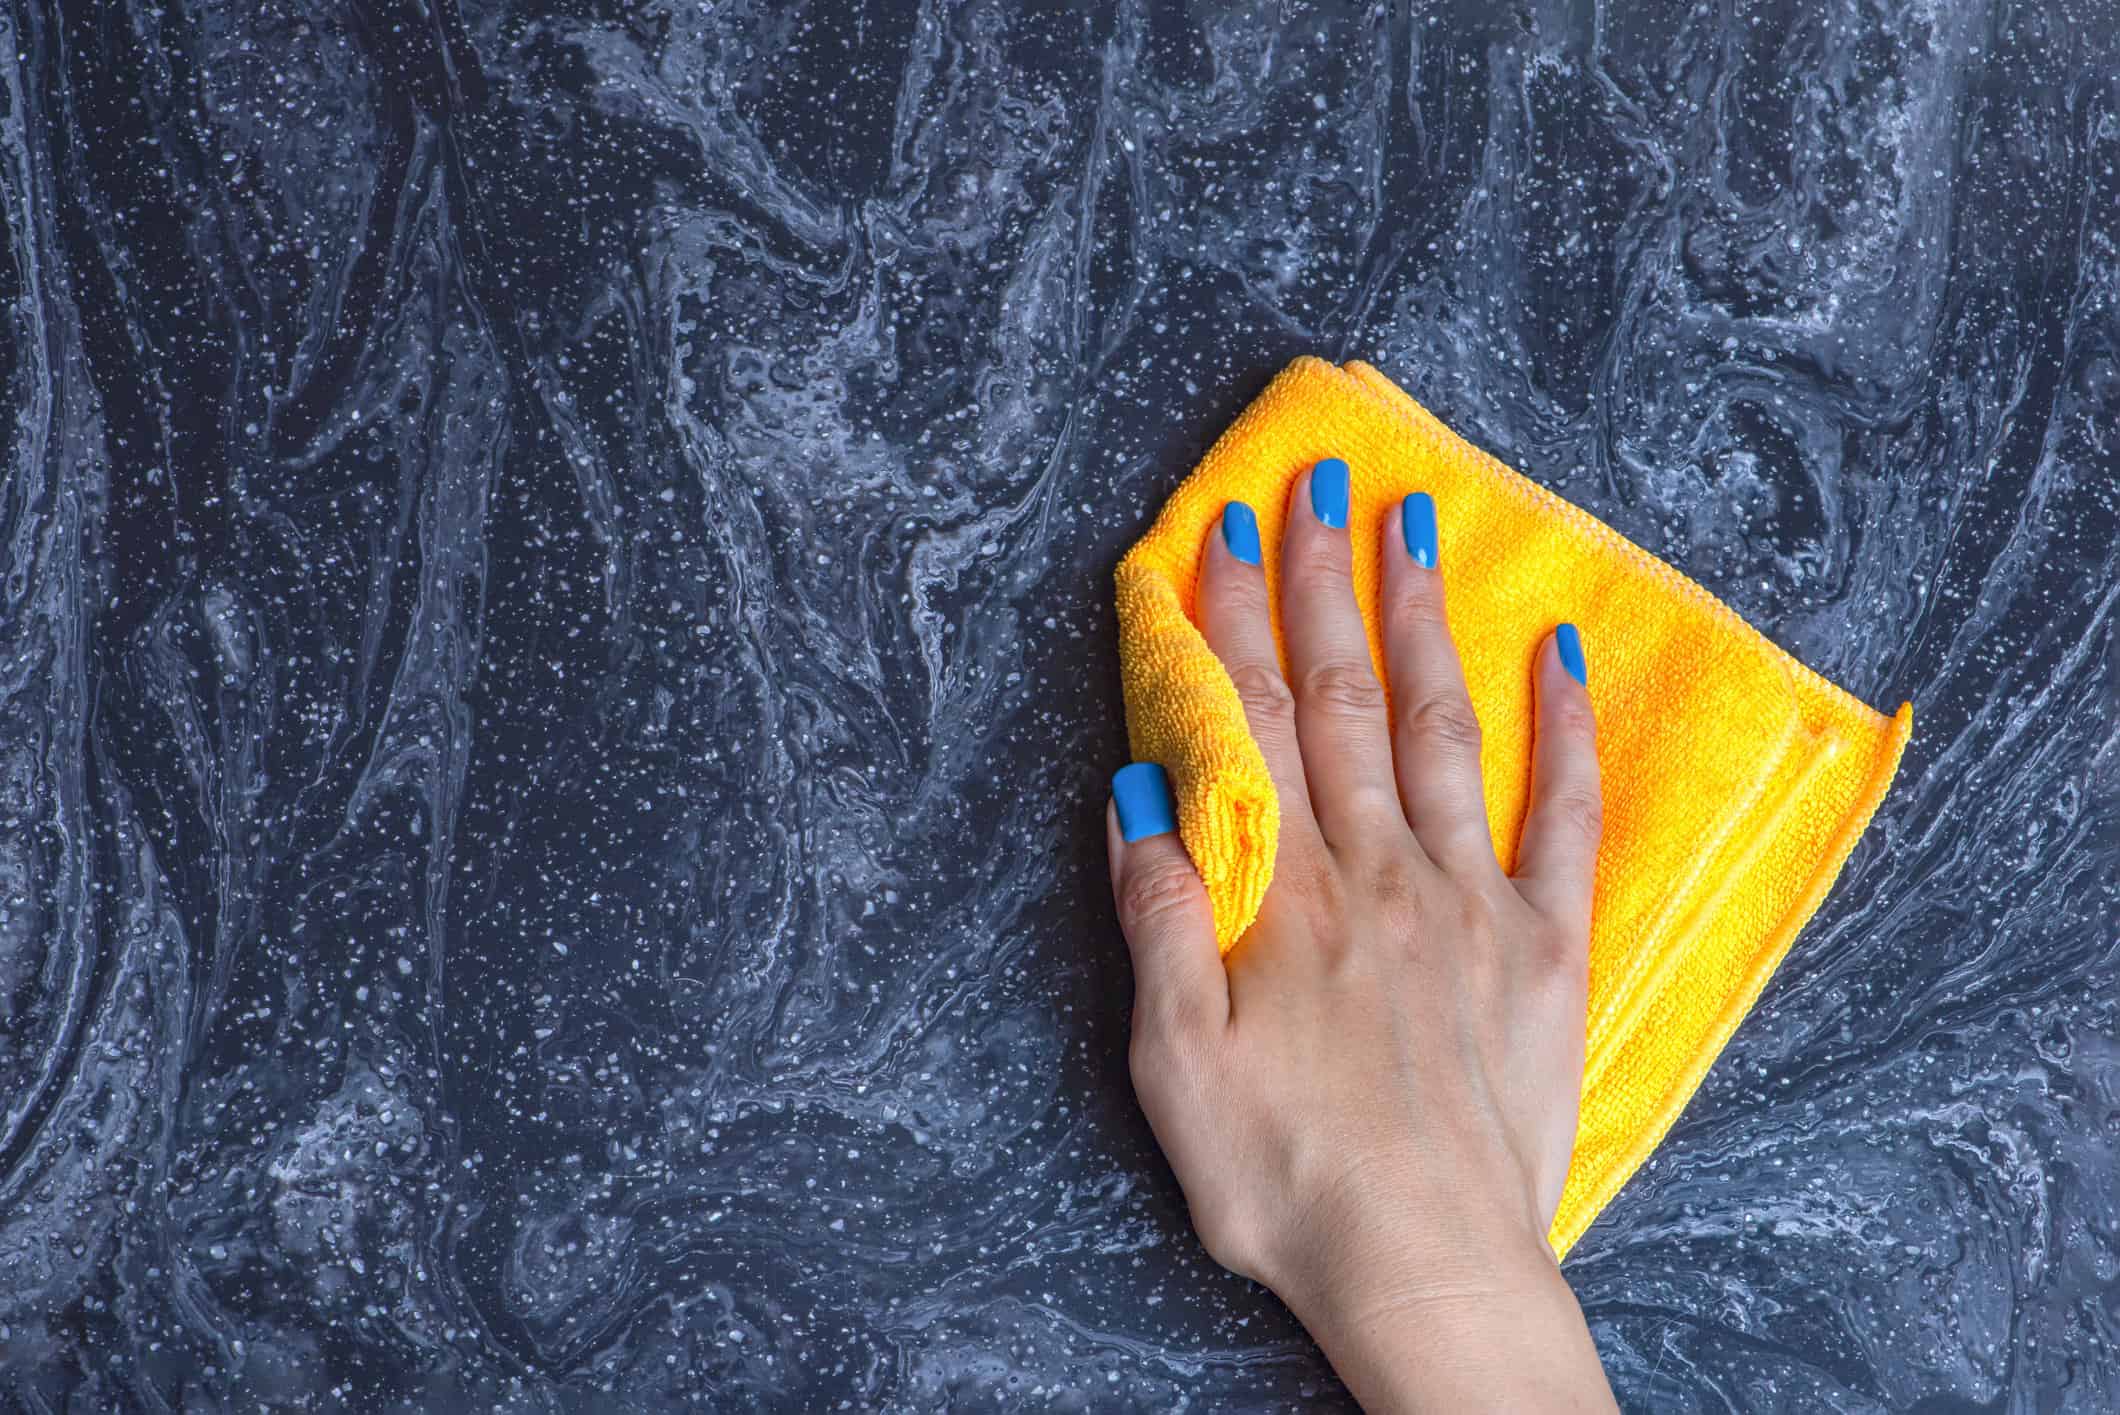 Lady with blue nails cleaning the countertop